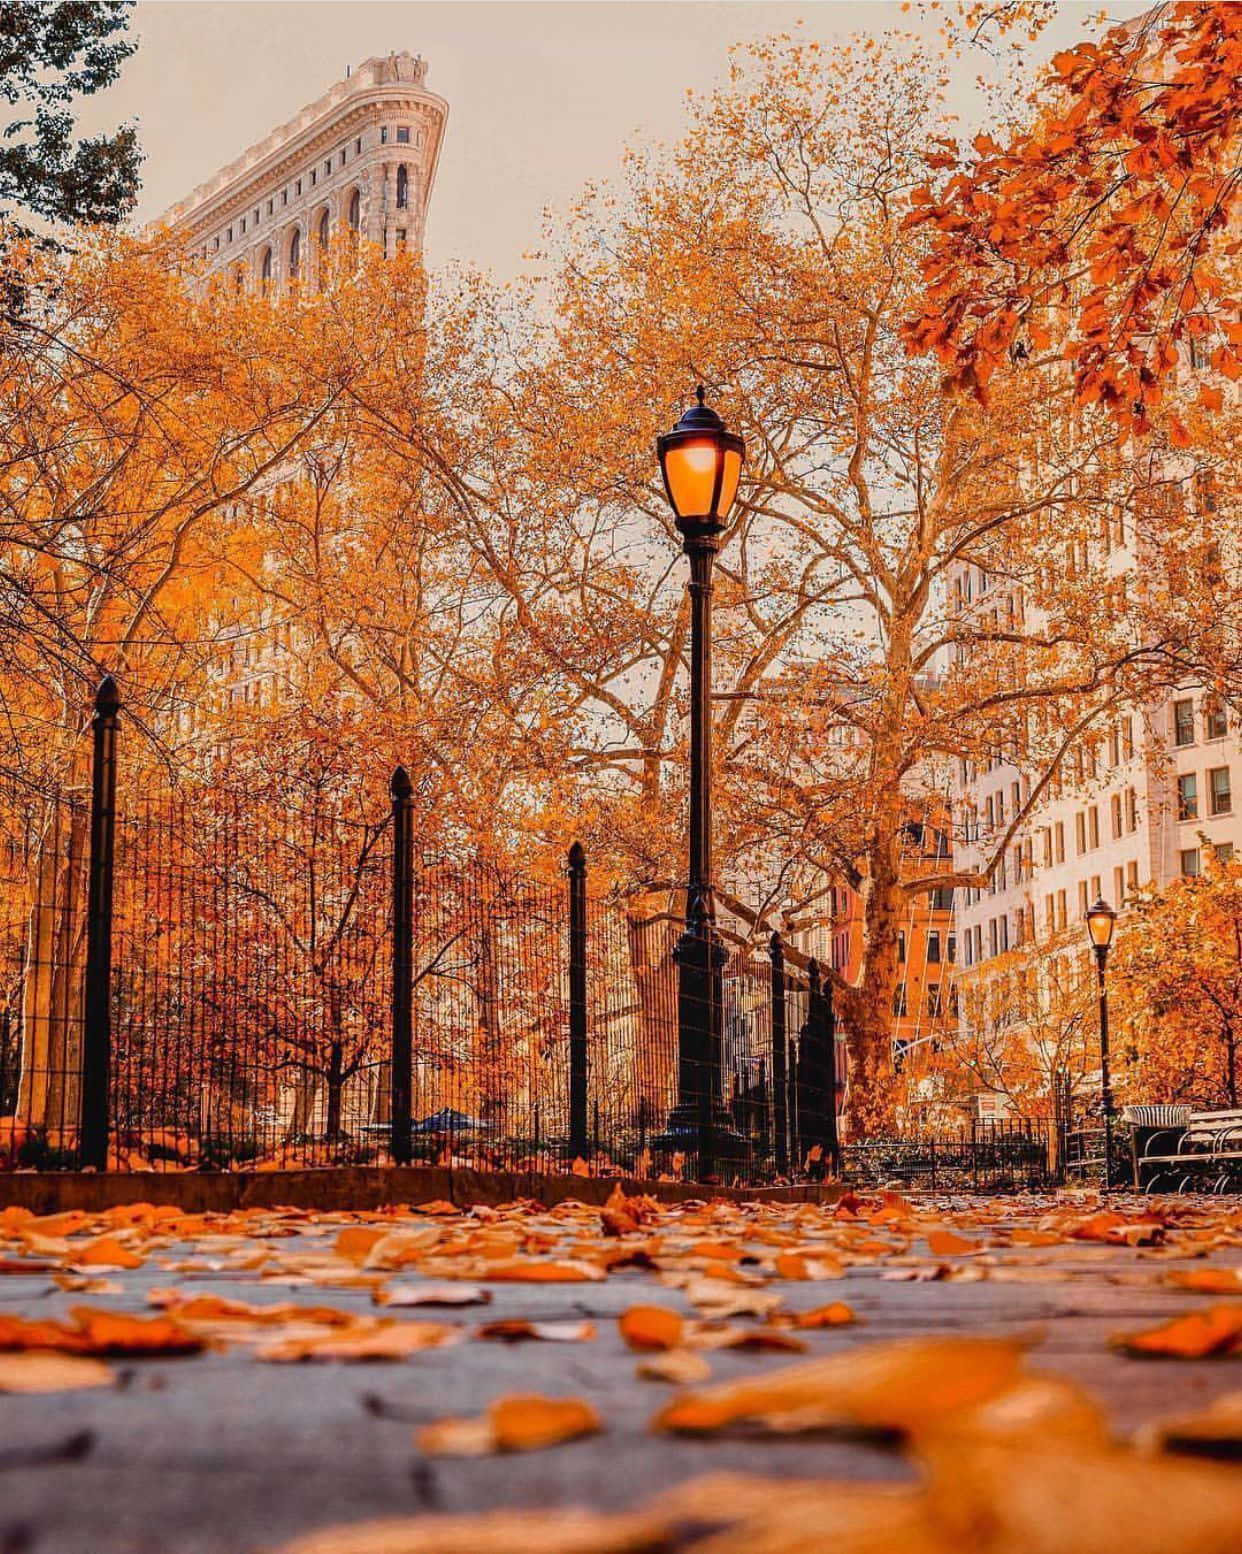 Scenic Fall City Landscape with Colorful Foliage Wallpaper